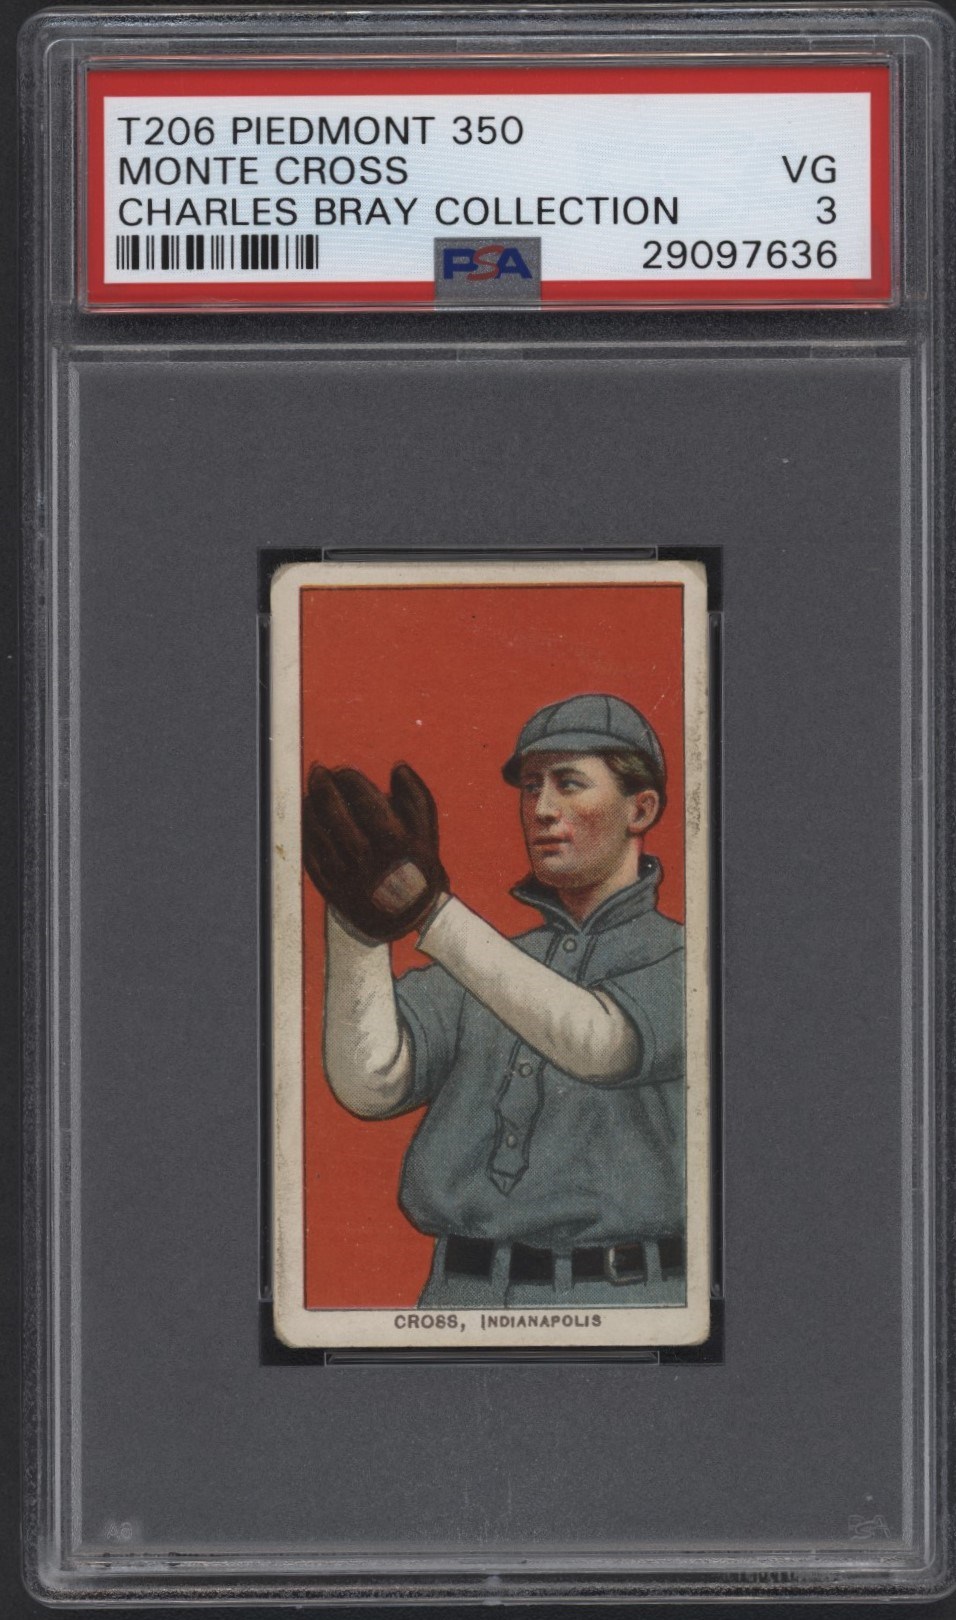 Baseball and Trading Cards - T206 Piedmont 350 Monte Cross PSA 3 From the Charles Bray Collection